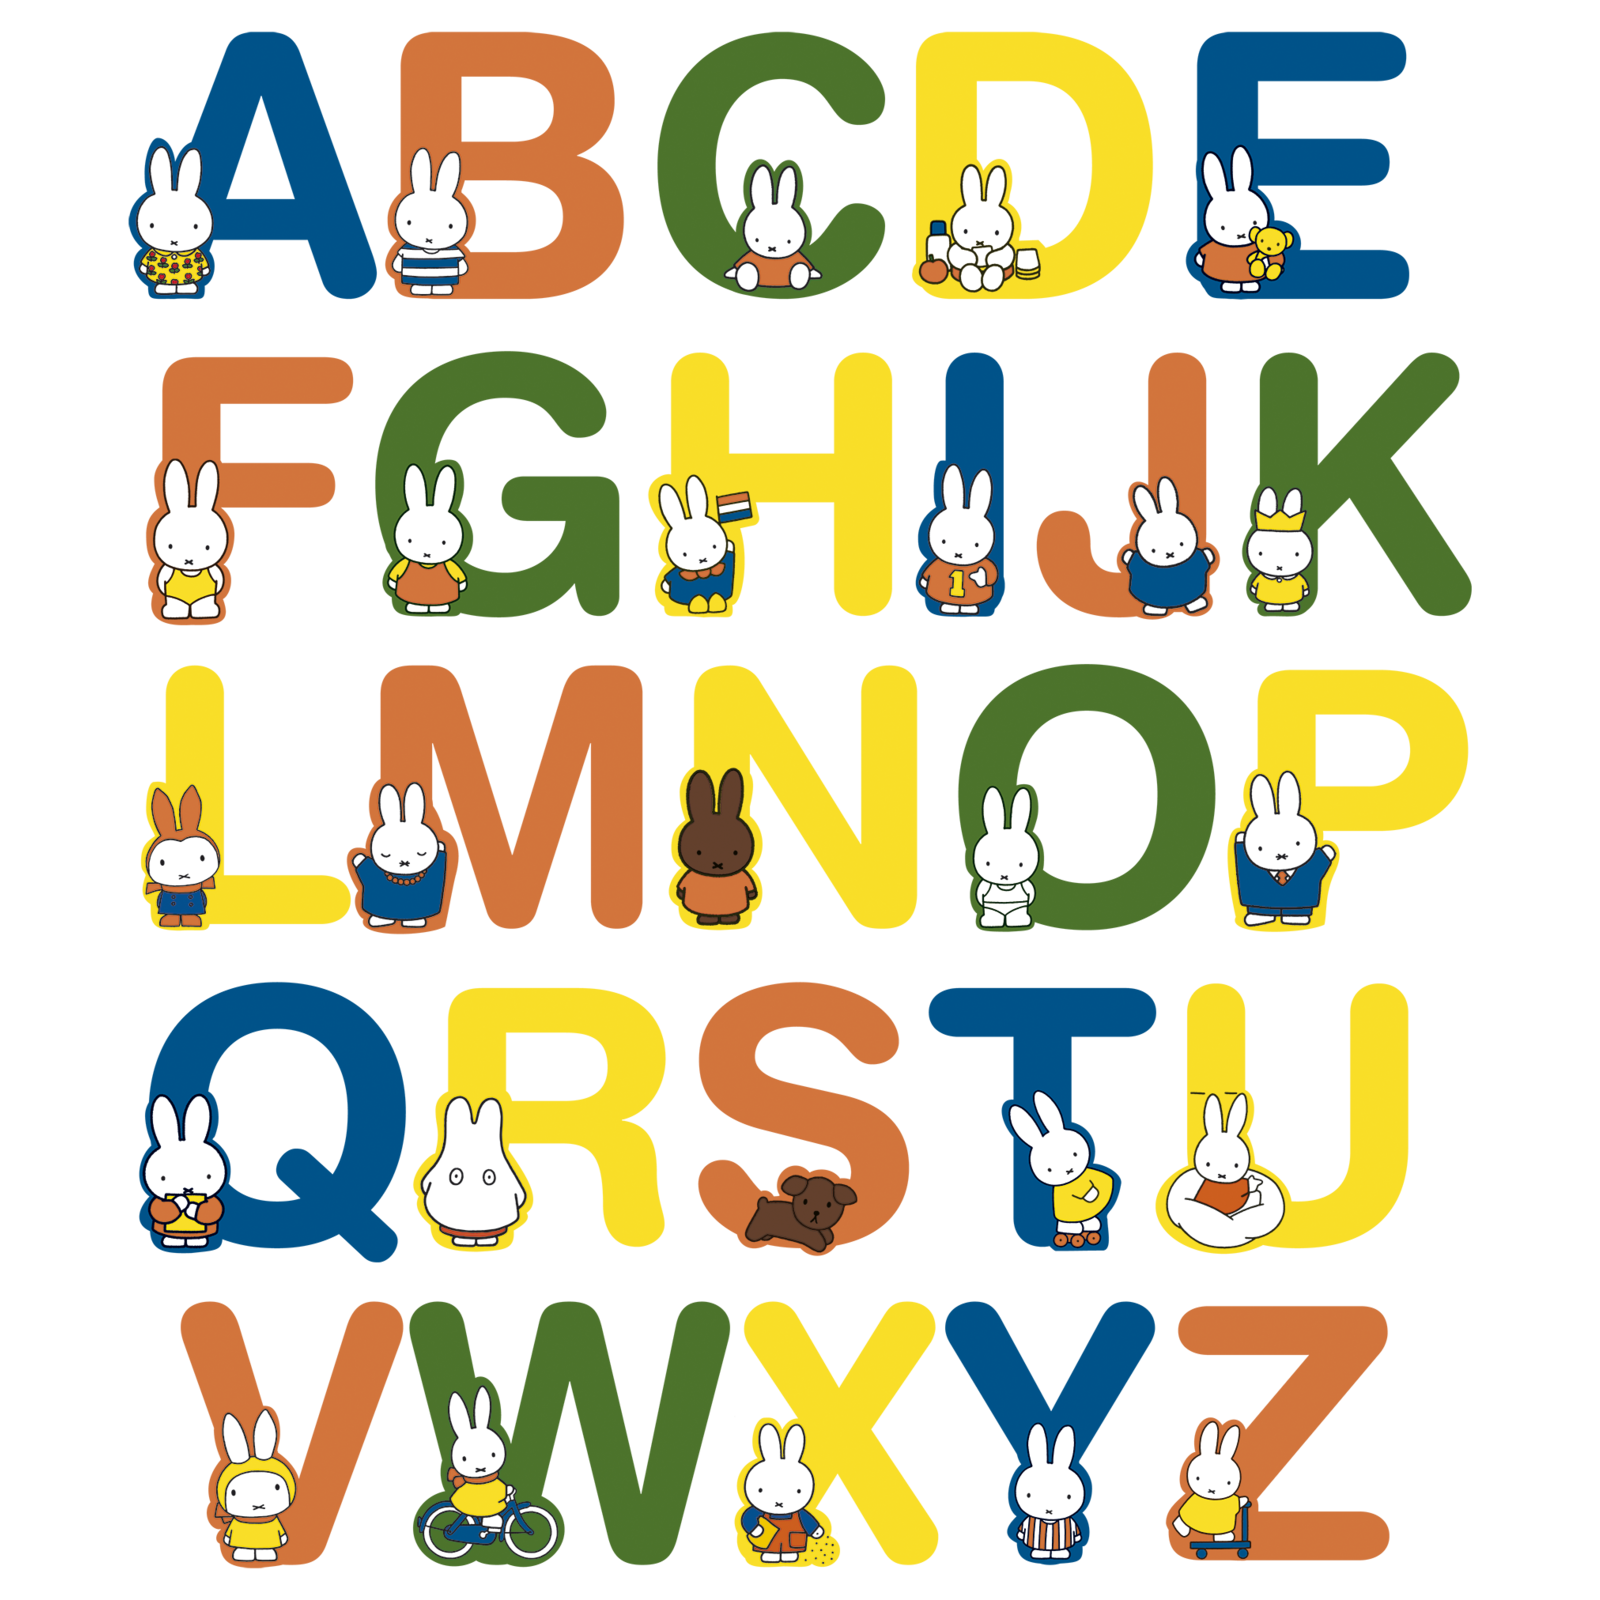 Miffy Wooden Letter O